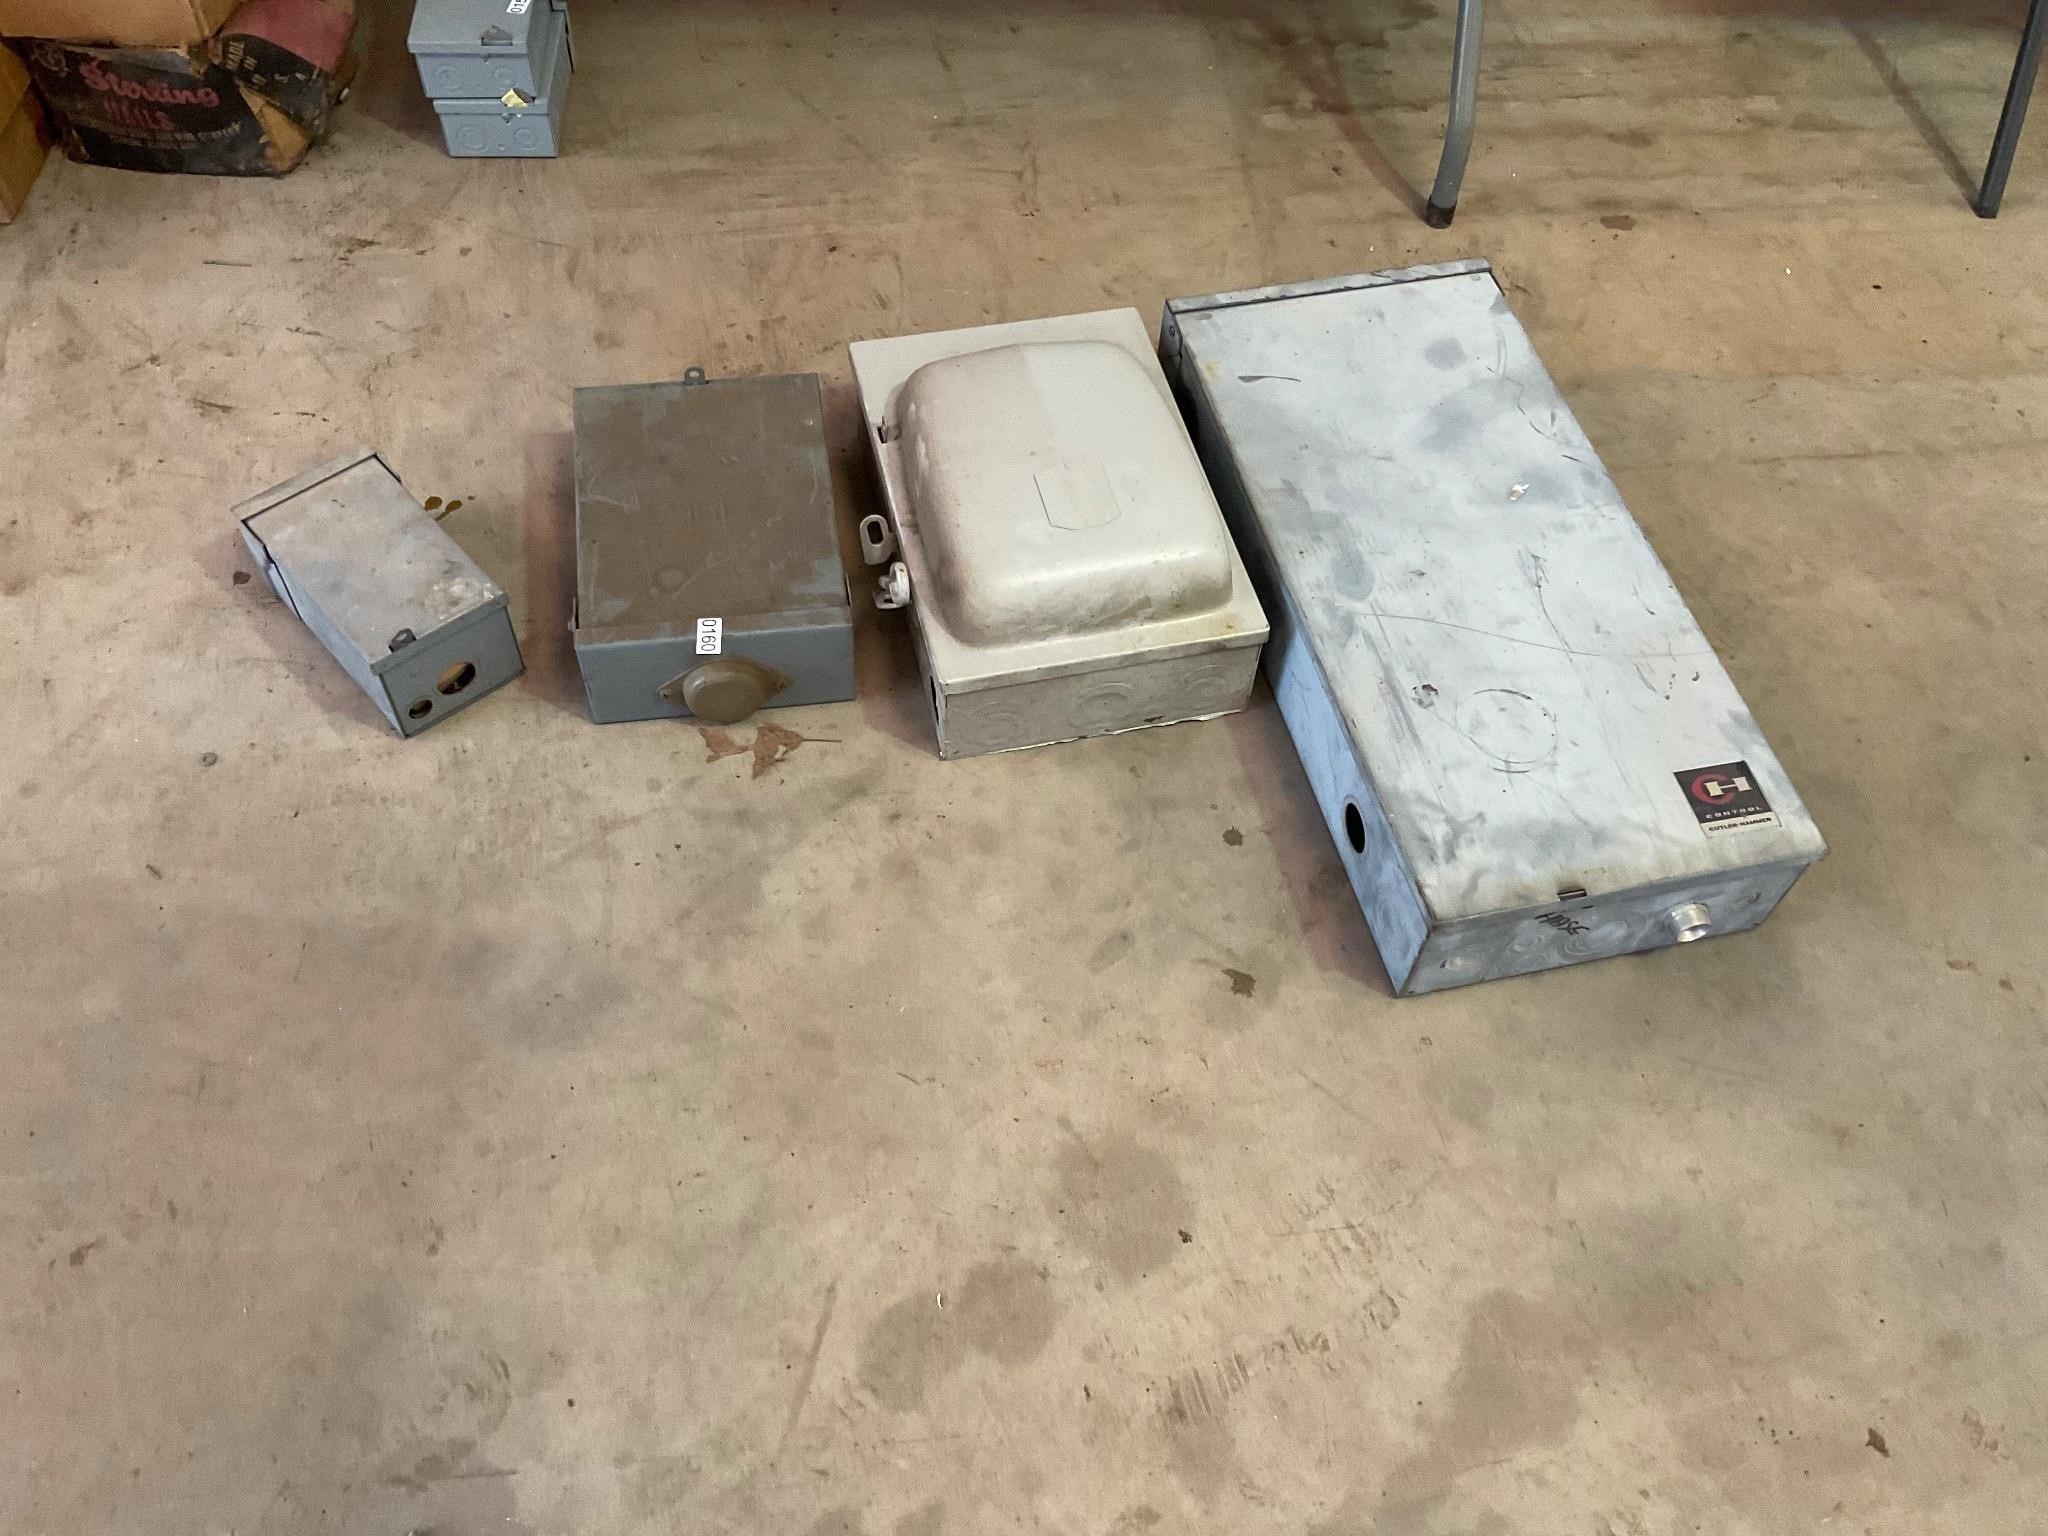 4- assorted electrical fuse boxes